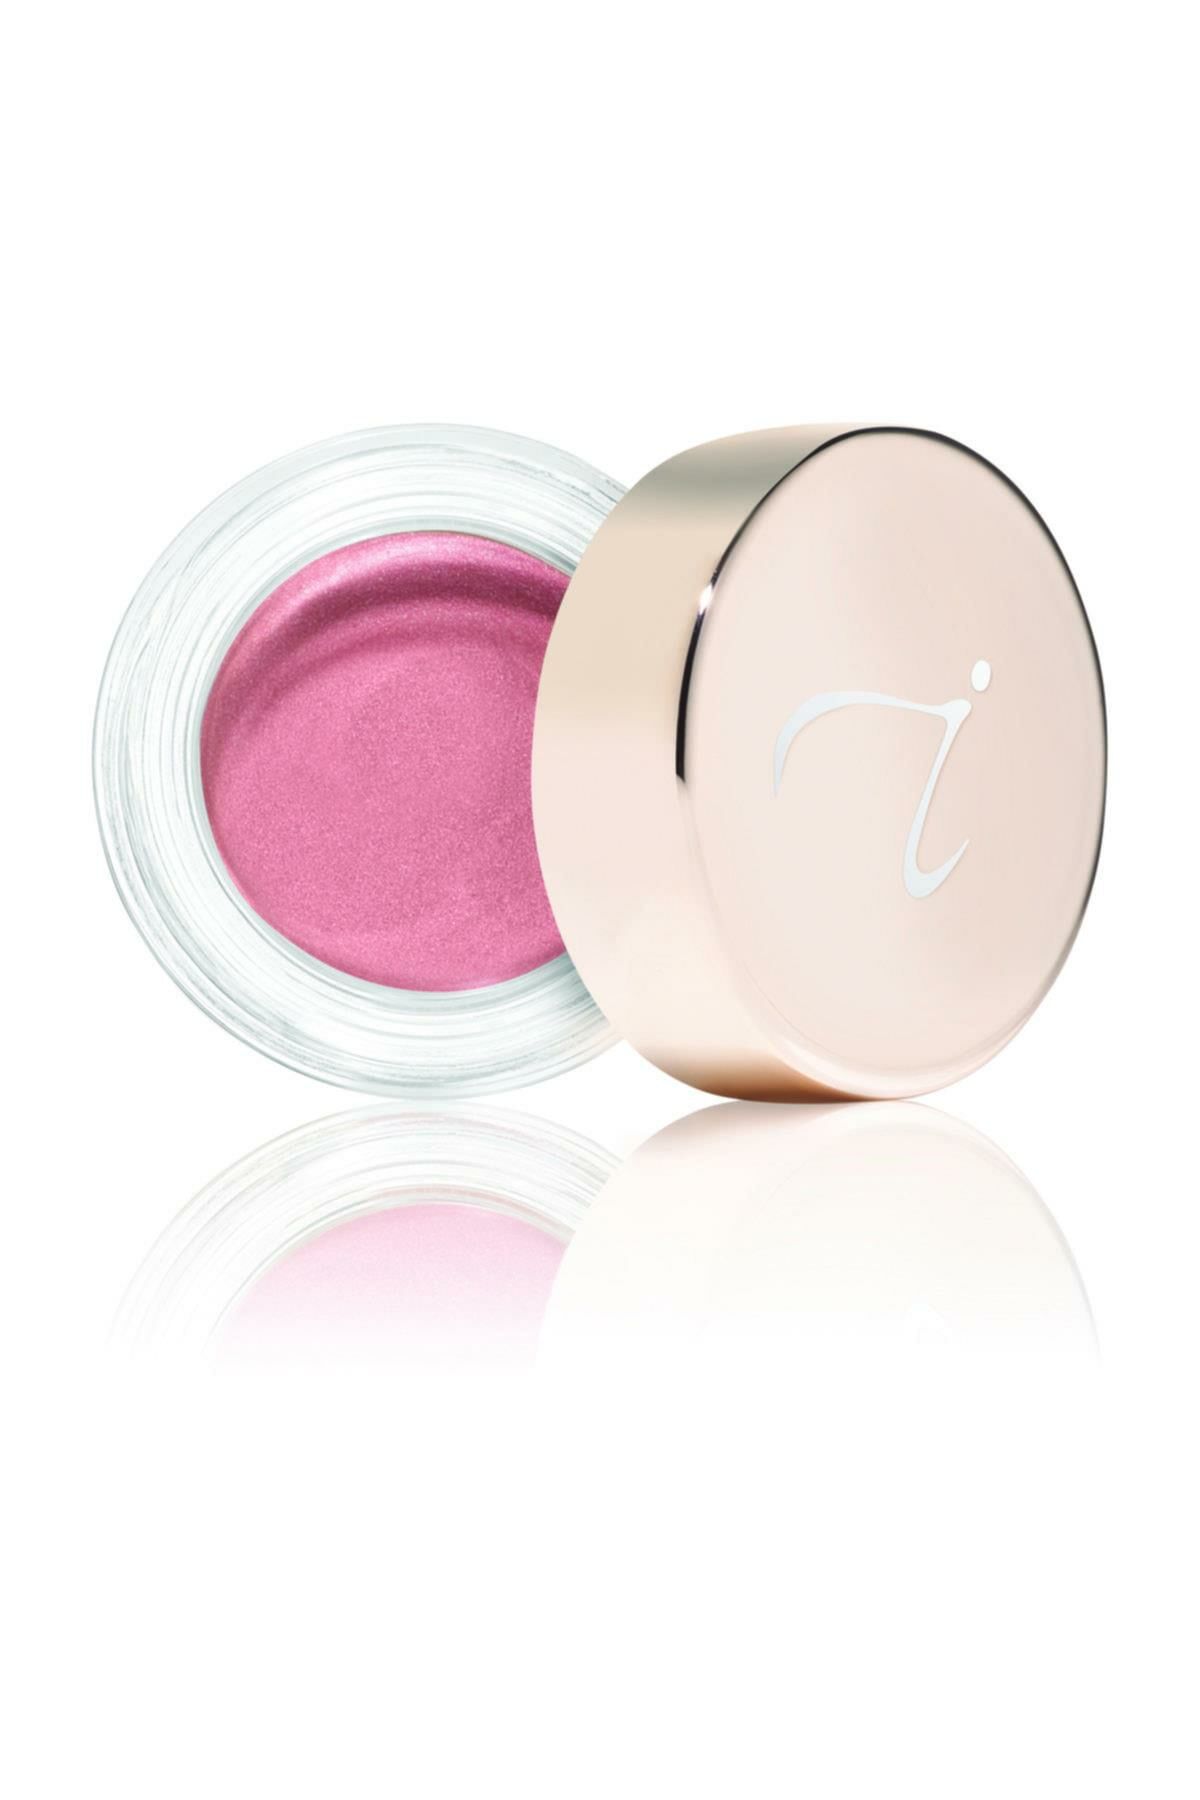 Jane Iredale Smooth Affair For Eyes Petal